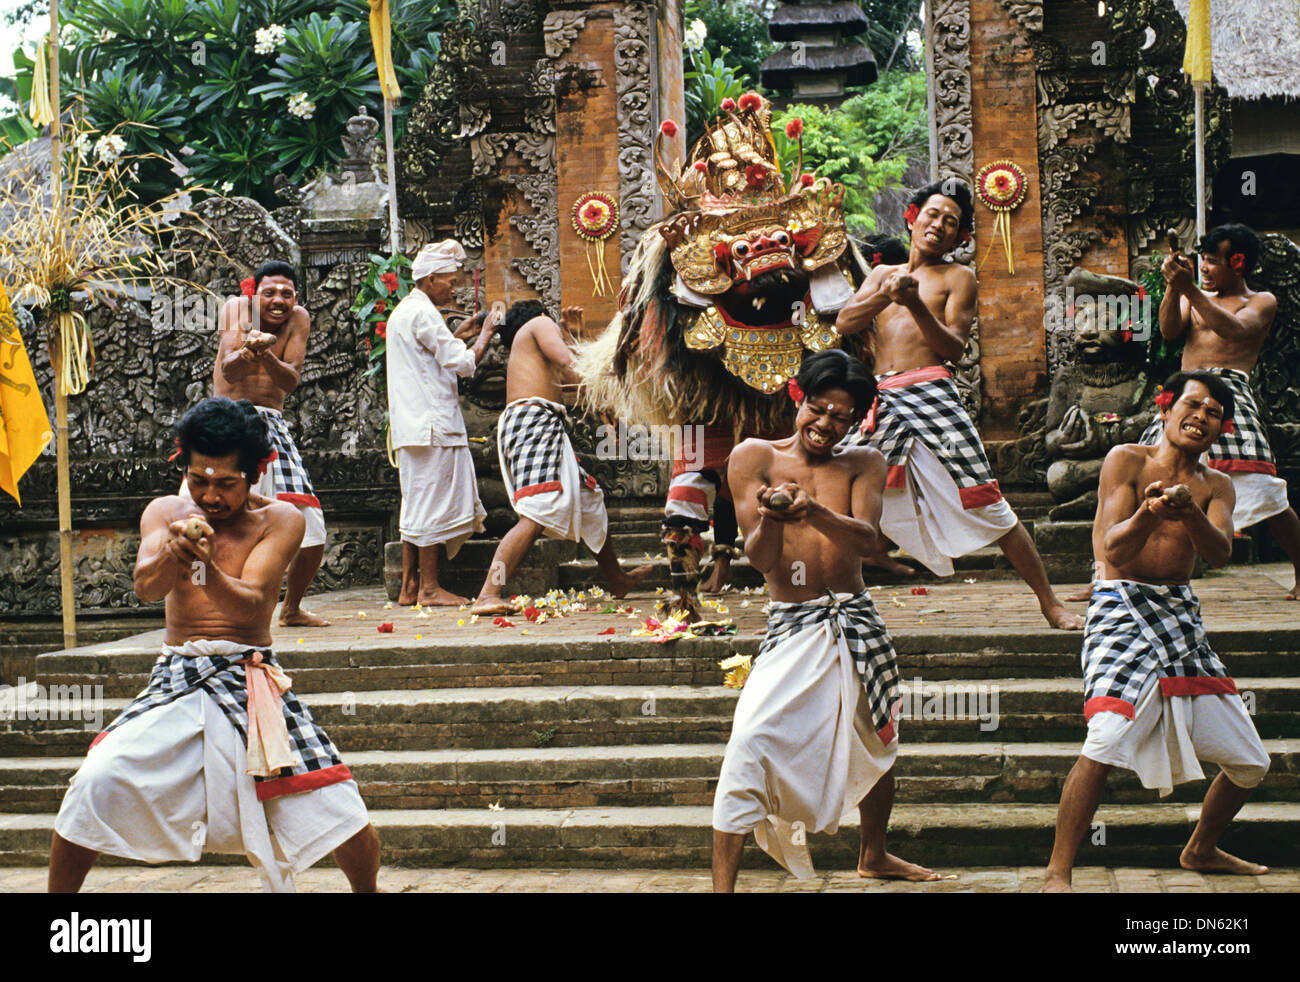 Performance of a Barong show (Ramayana story, traditional dances and music), Bali, Indonesia Stock Photo